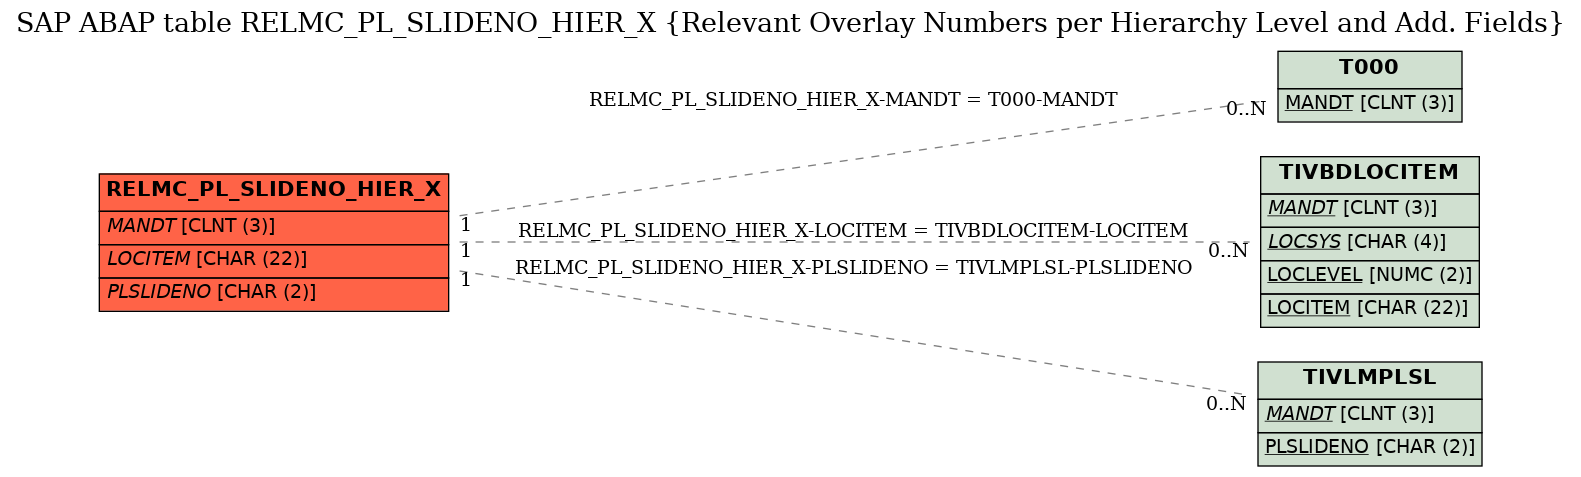 E-R Diagram for table RELMC_PL_SLIDENO_HIER_X (Relevant Overlay Numbers per Hierarchy Level and Add. Fields)